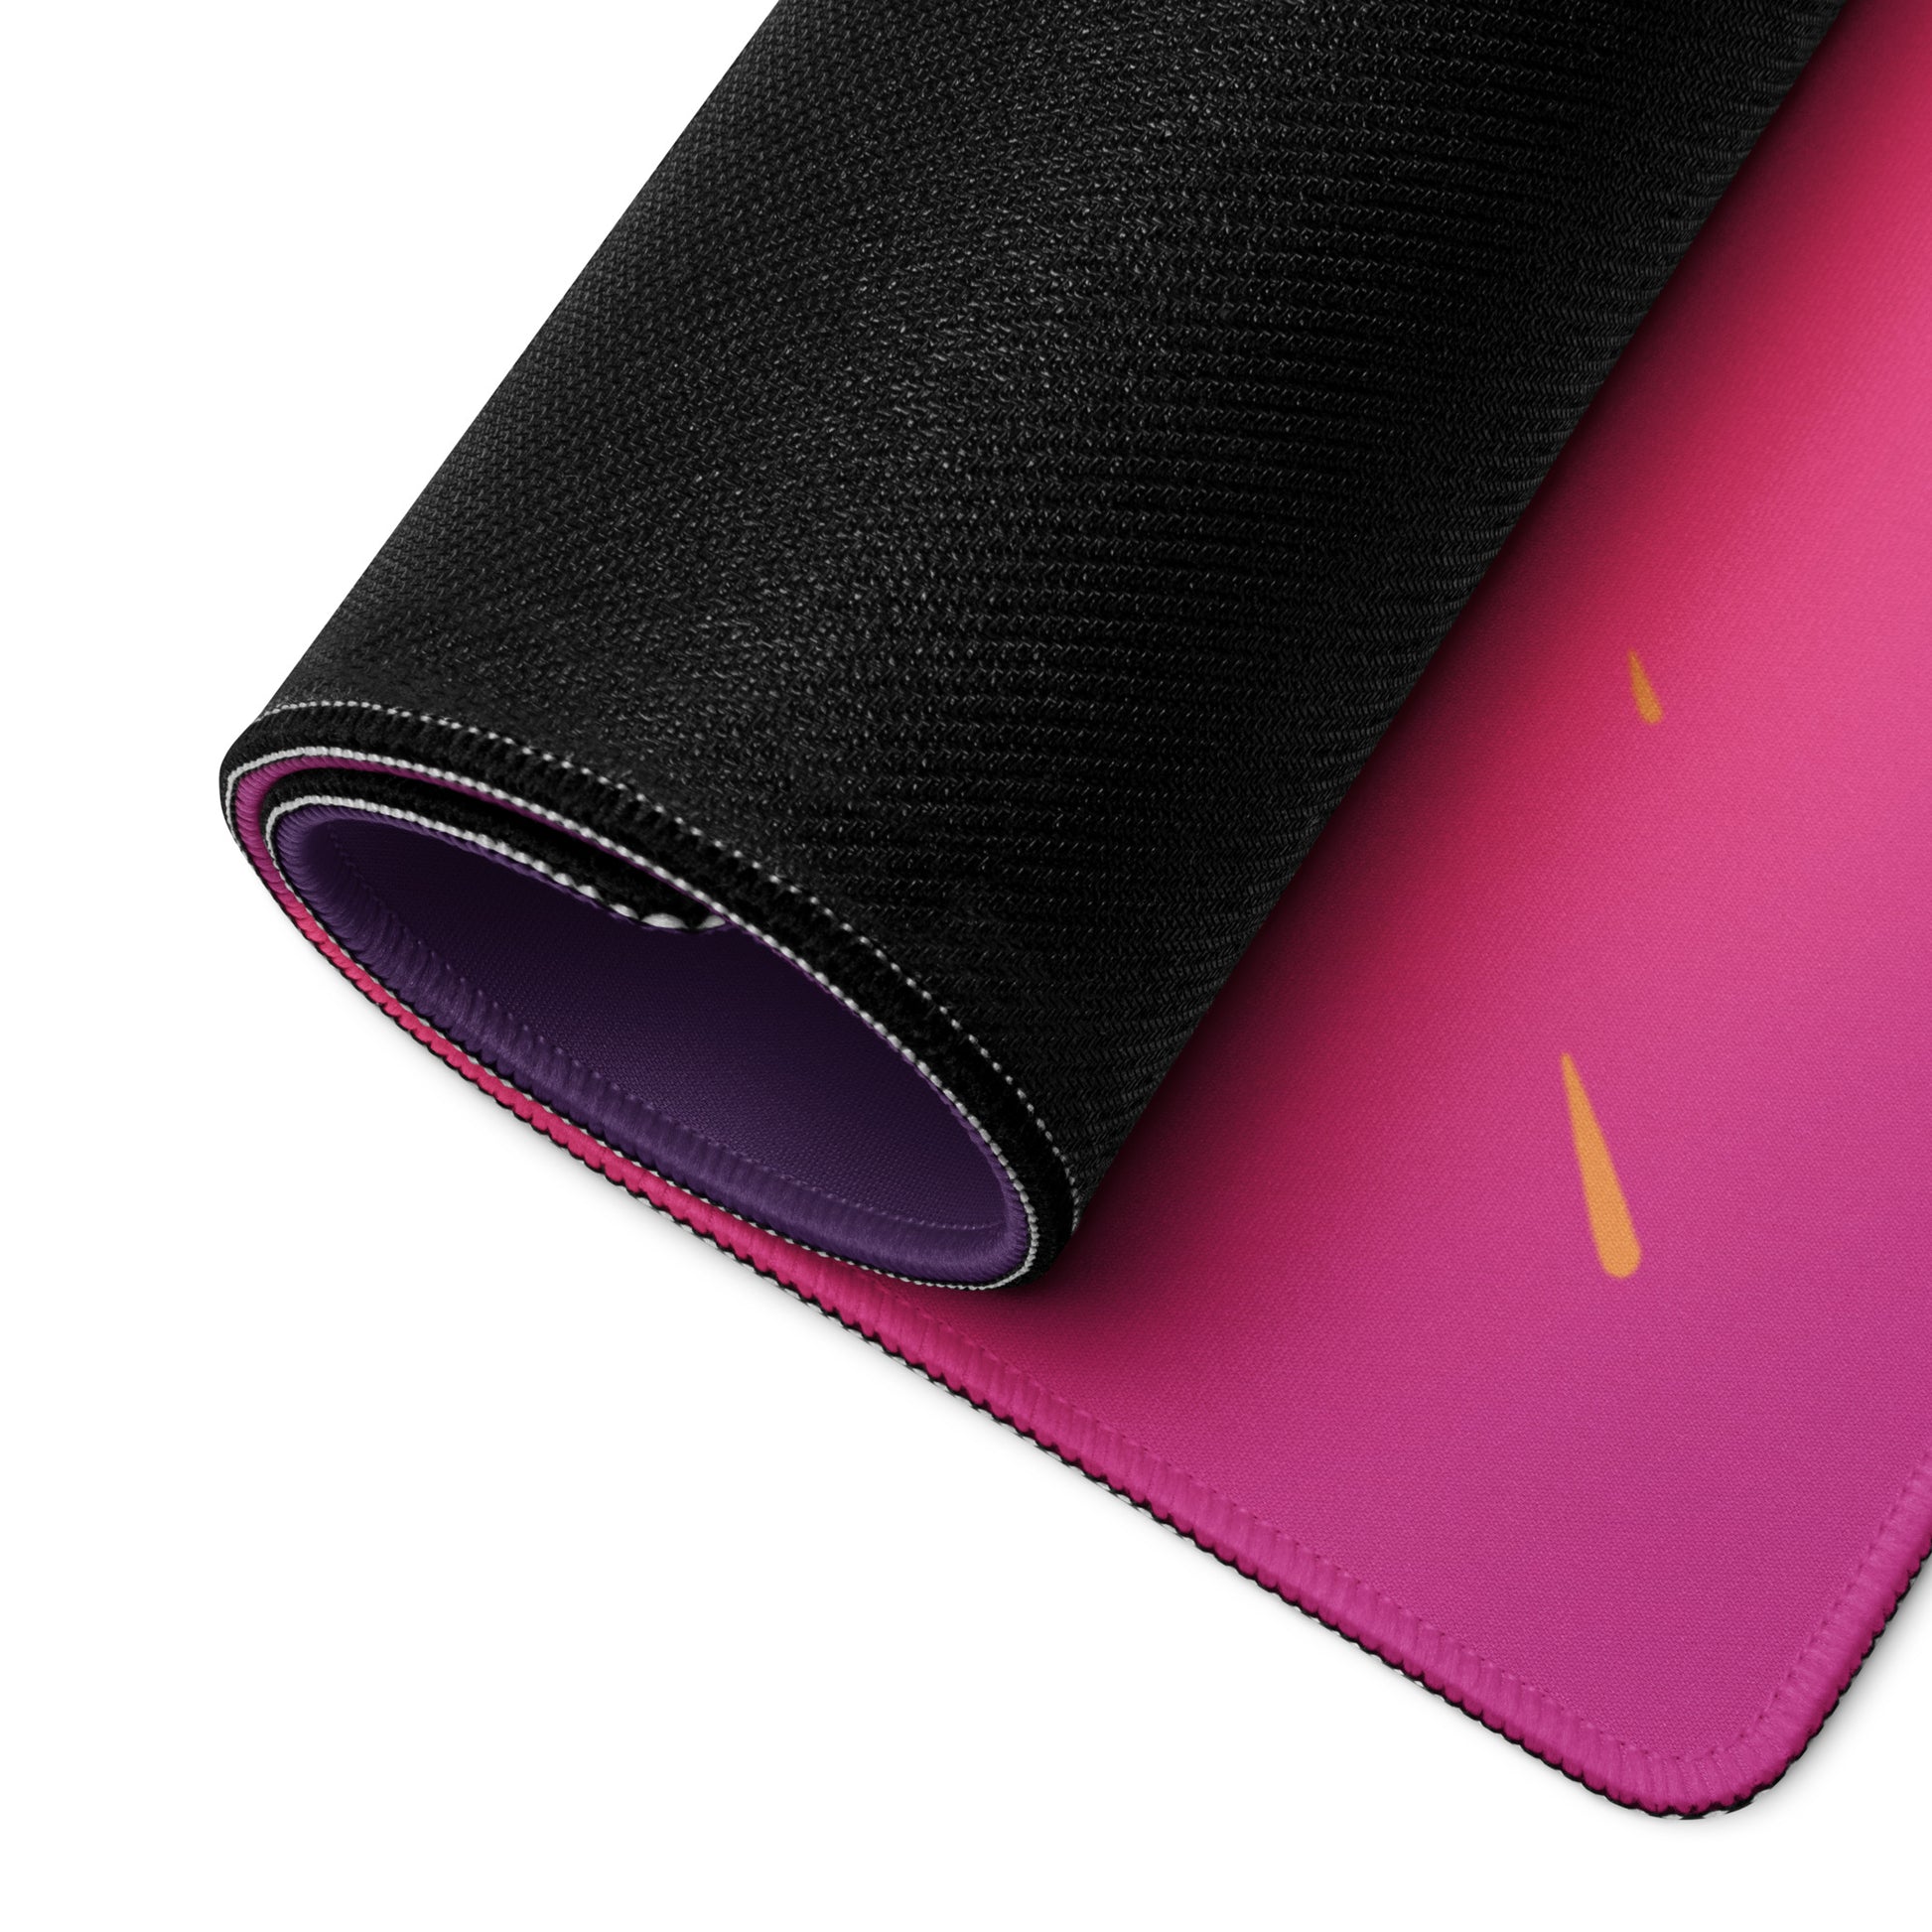 A 36" x 18" pink and purple desk pad with a futuristic samurai rolled up.